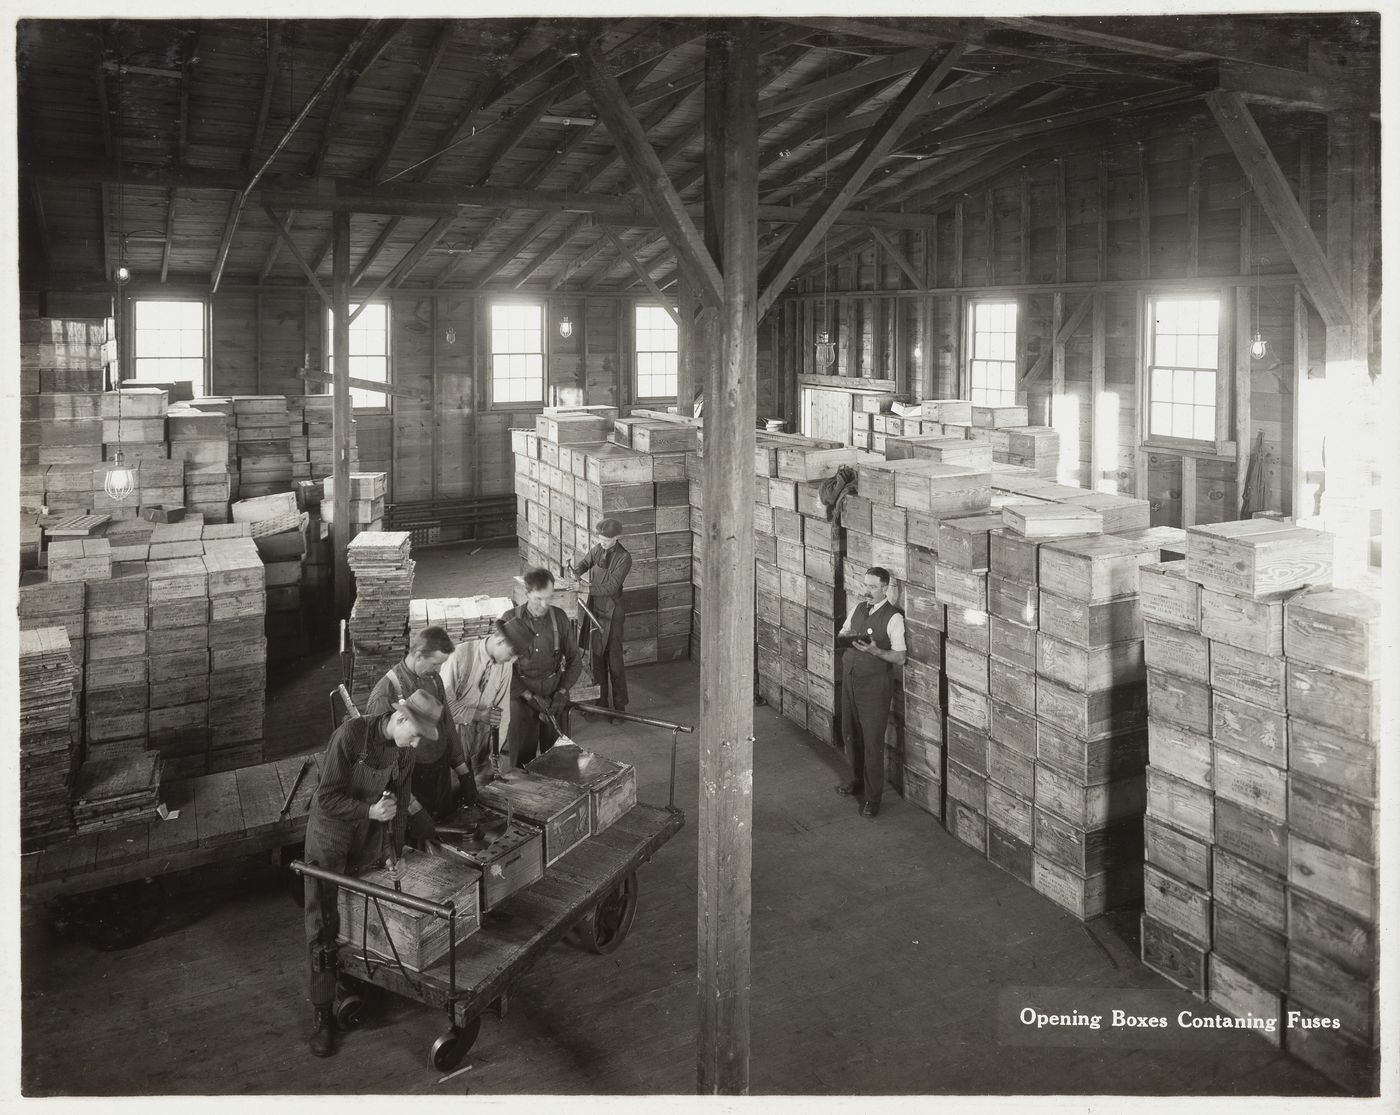 Interior view of workers opening boxes containing fuses at the Energite Explosives Plant No. 3, the Shell Loading Plant, Renfrew, Ontario, Canada